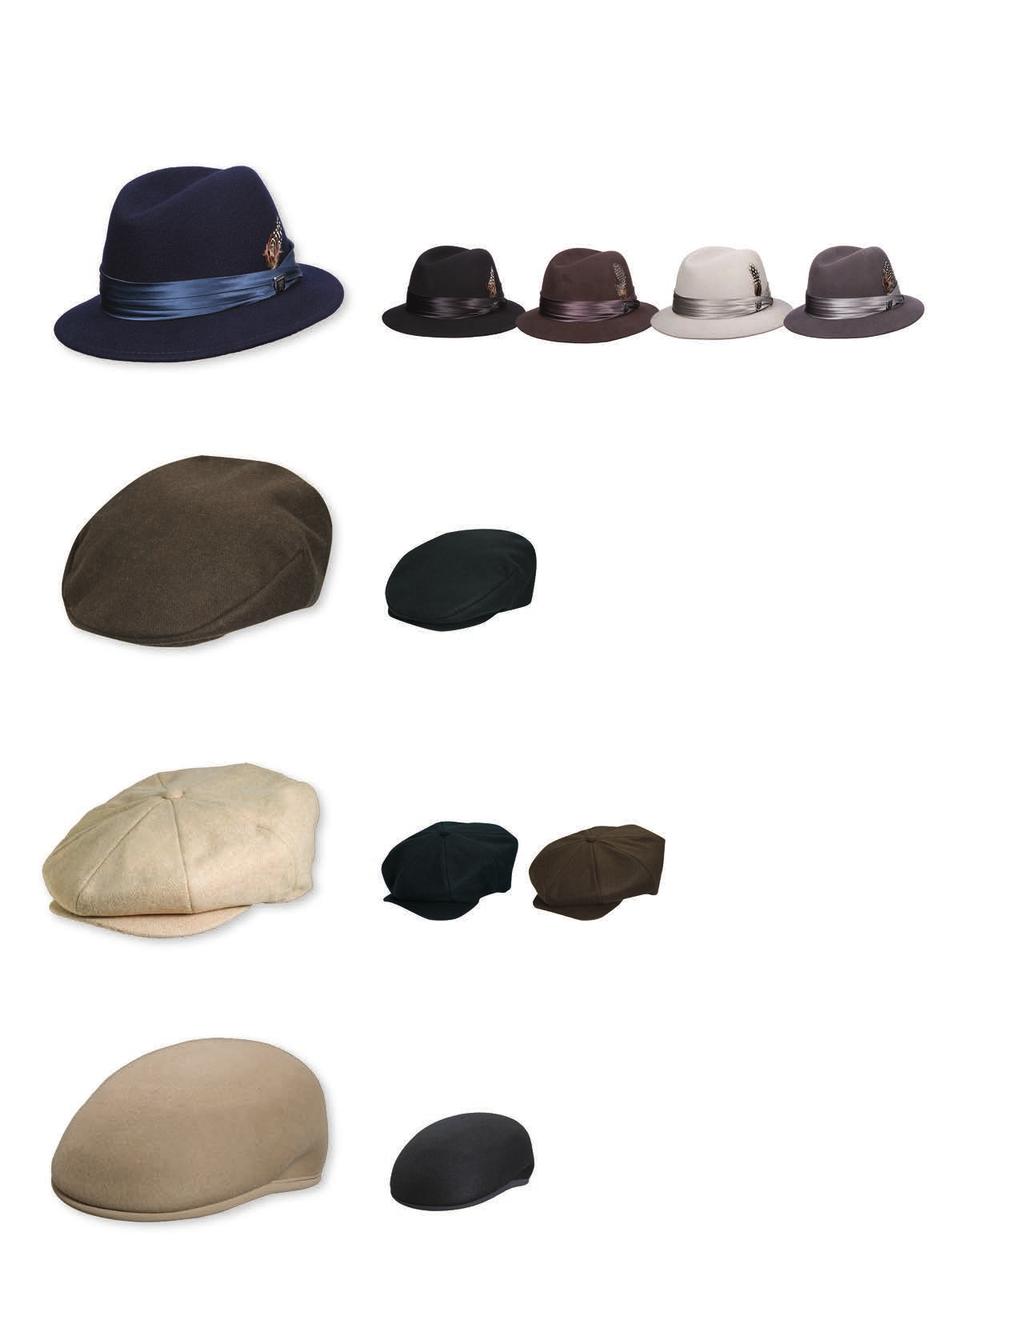 SAW640 Shape: Low Rider / Material: Wool Felt / Details: 3-Pleat Silk, Satin Lining Brim: 2 / Sold by Color:, Brown, Cream, Grey, Navy Size Pack: 1/S, 2/M, 2/L, 1/XL / Also Sold by Size: M-XL / Also